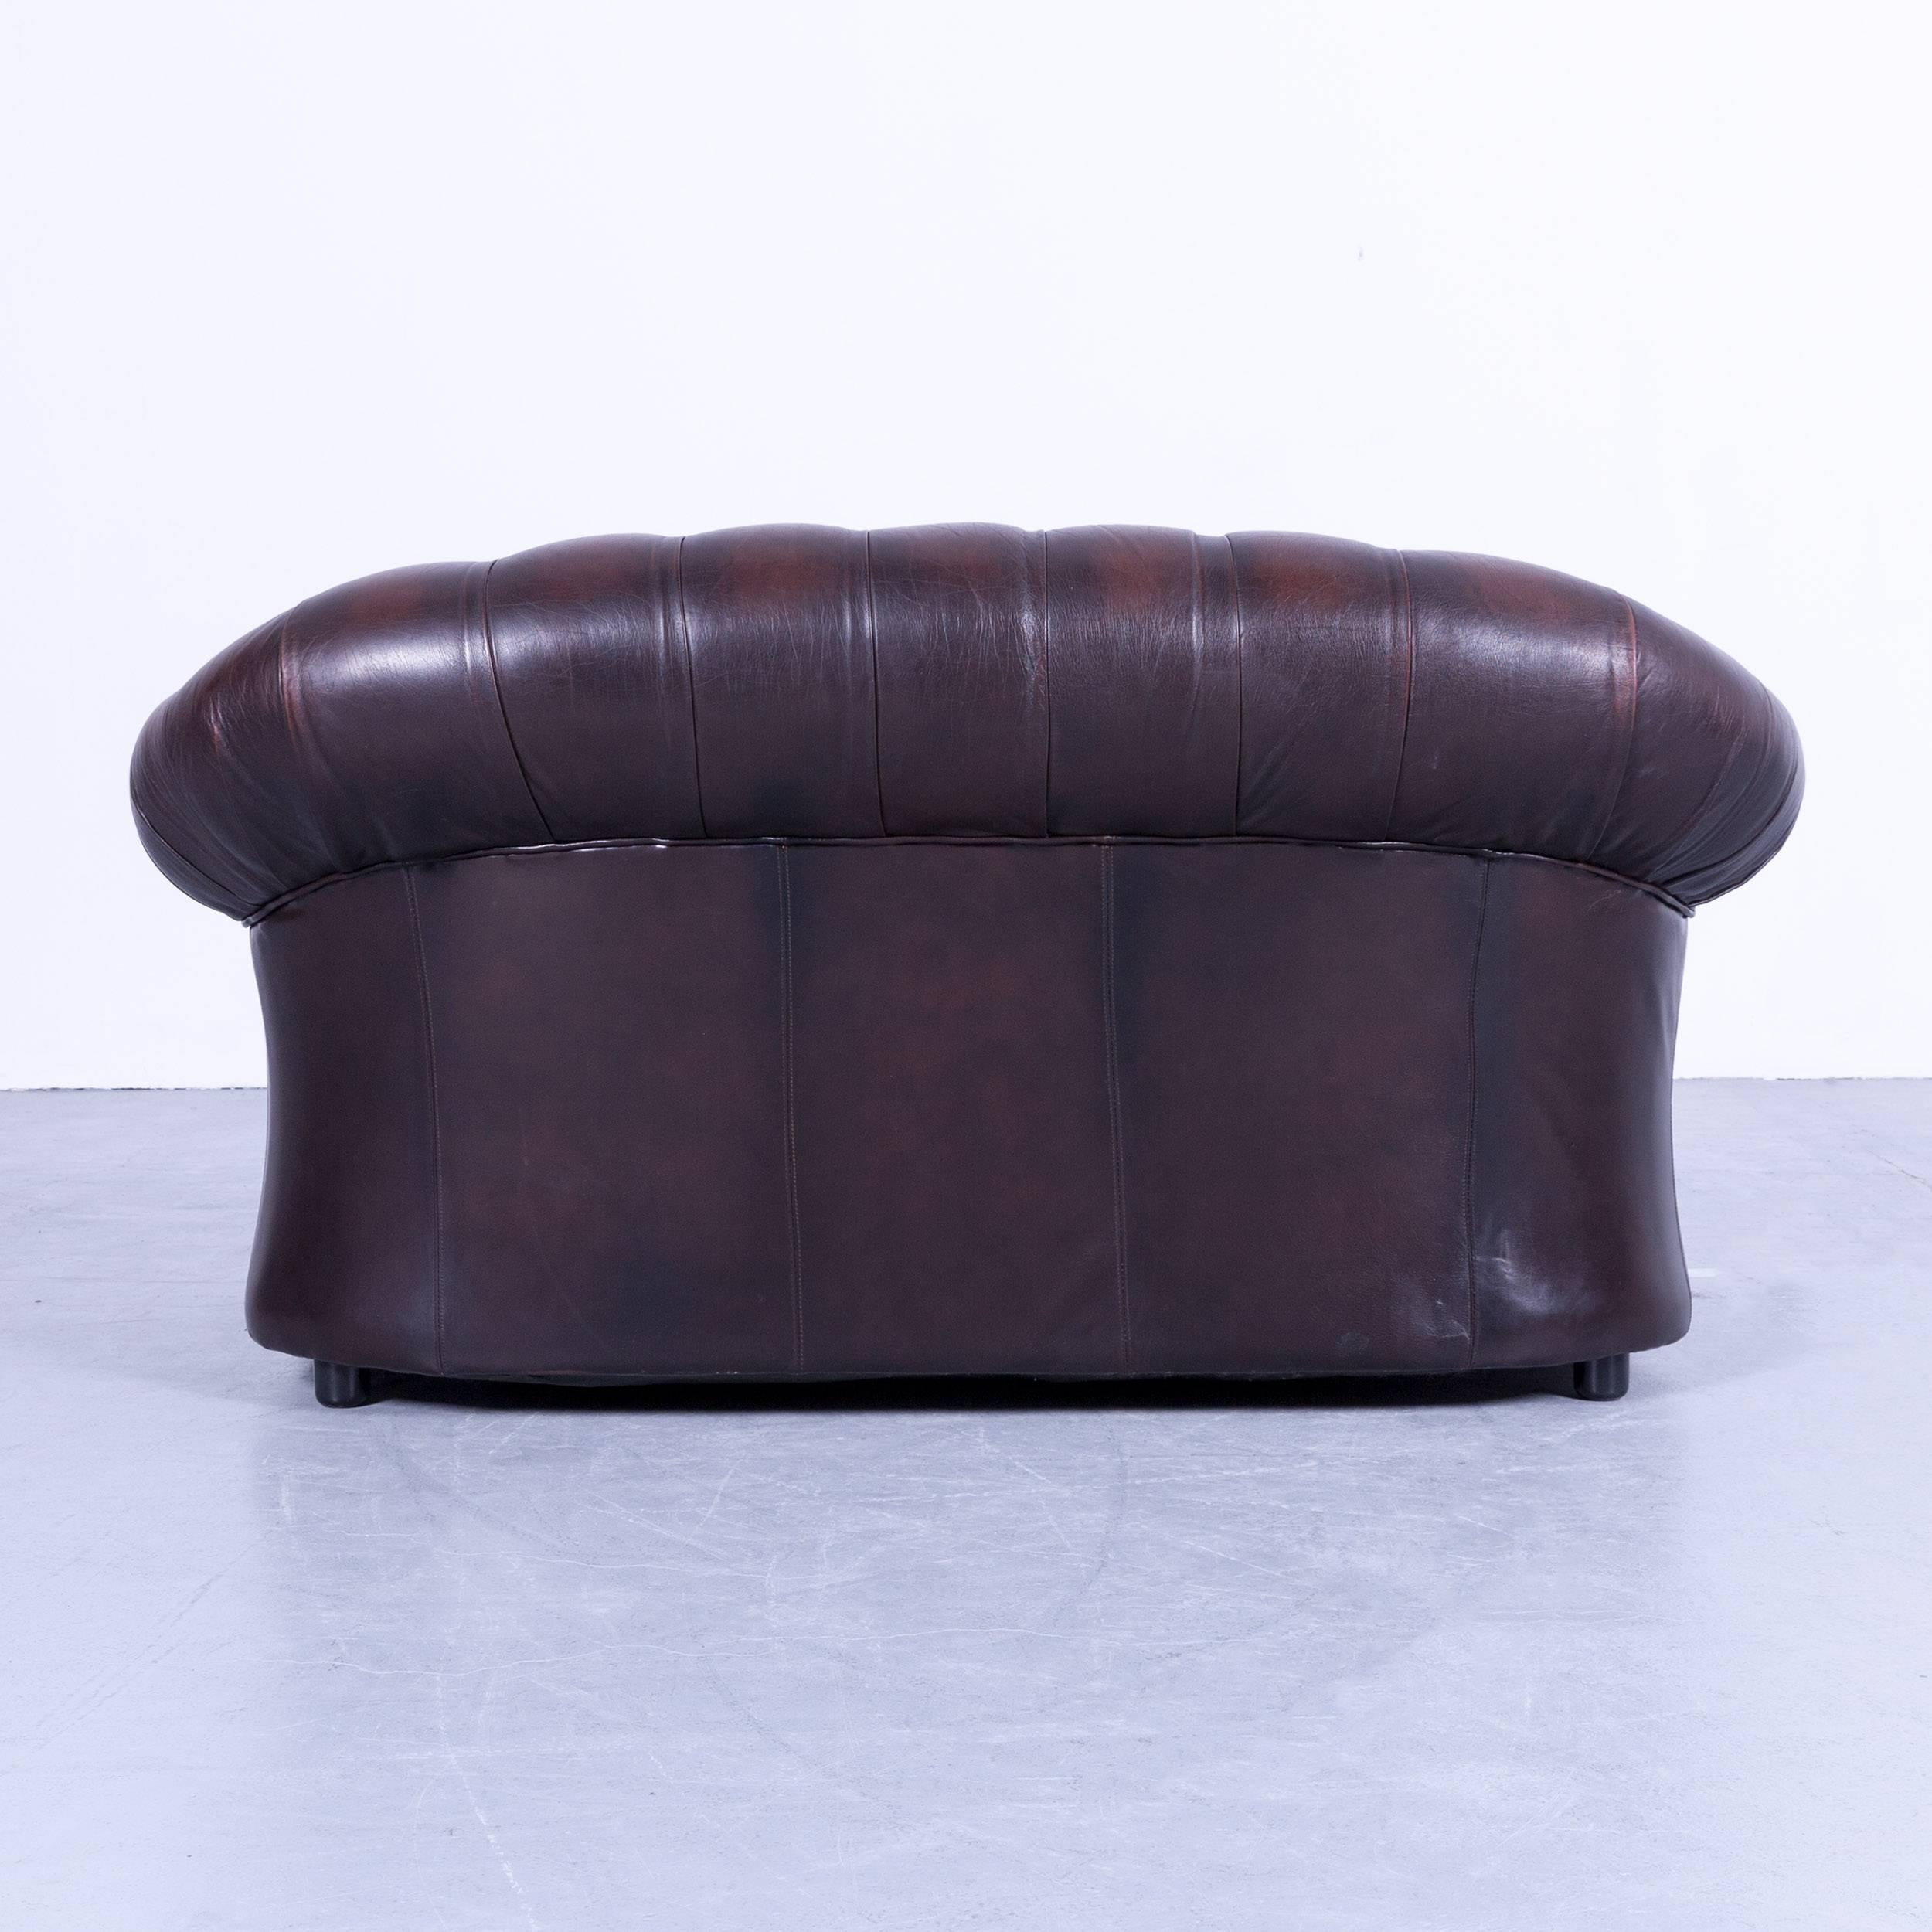 Centurion Chesterfield Sofa Brown Mocca Two-Seat Vintage Retro Couch 2